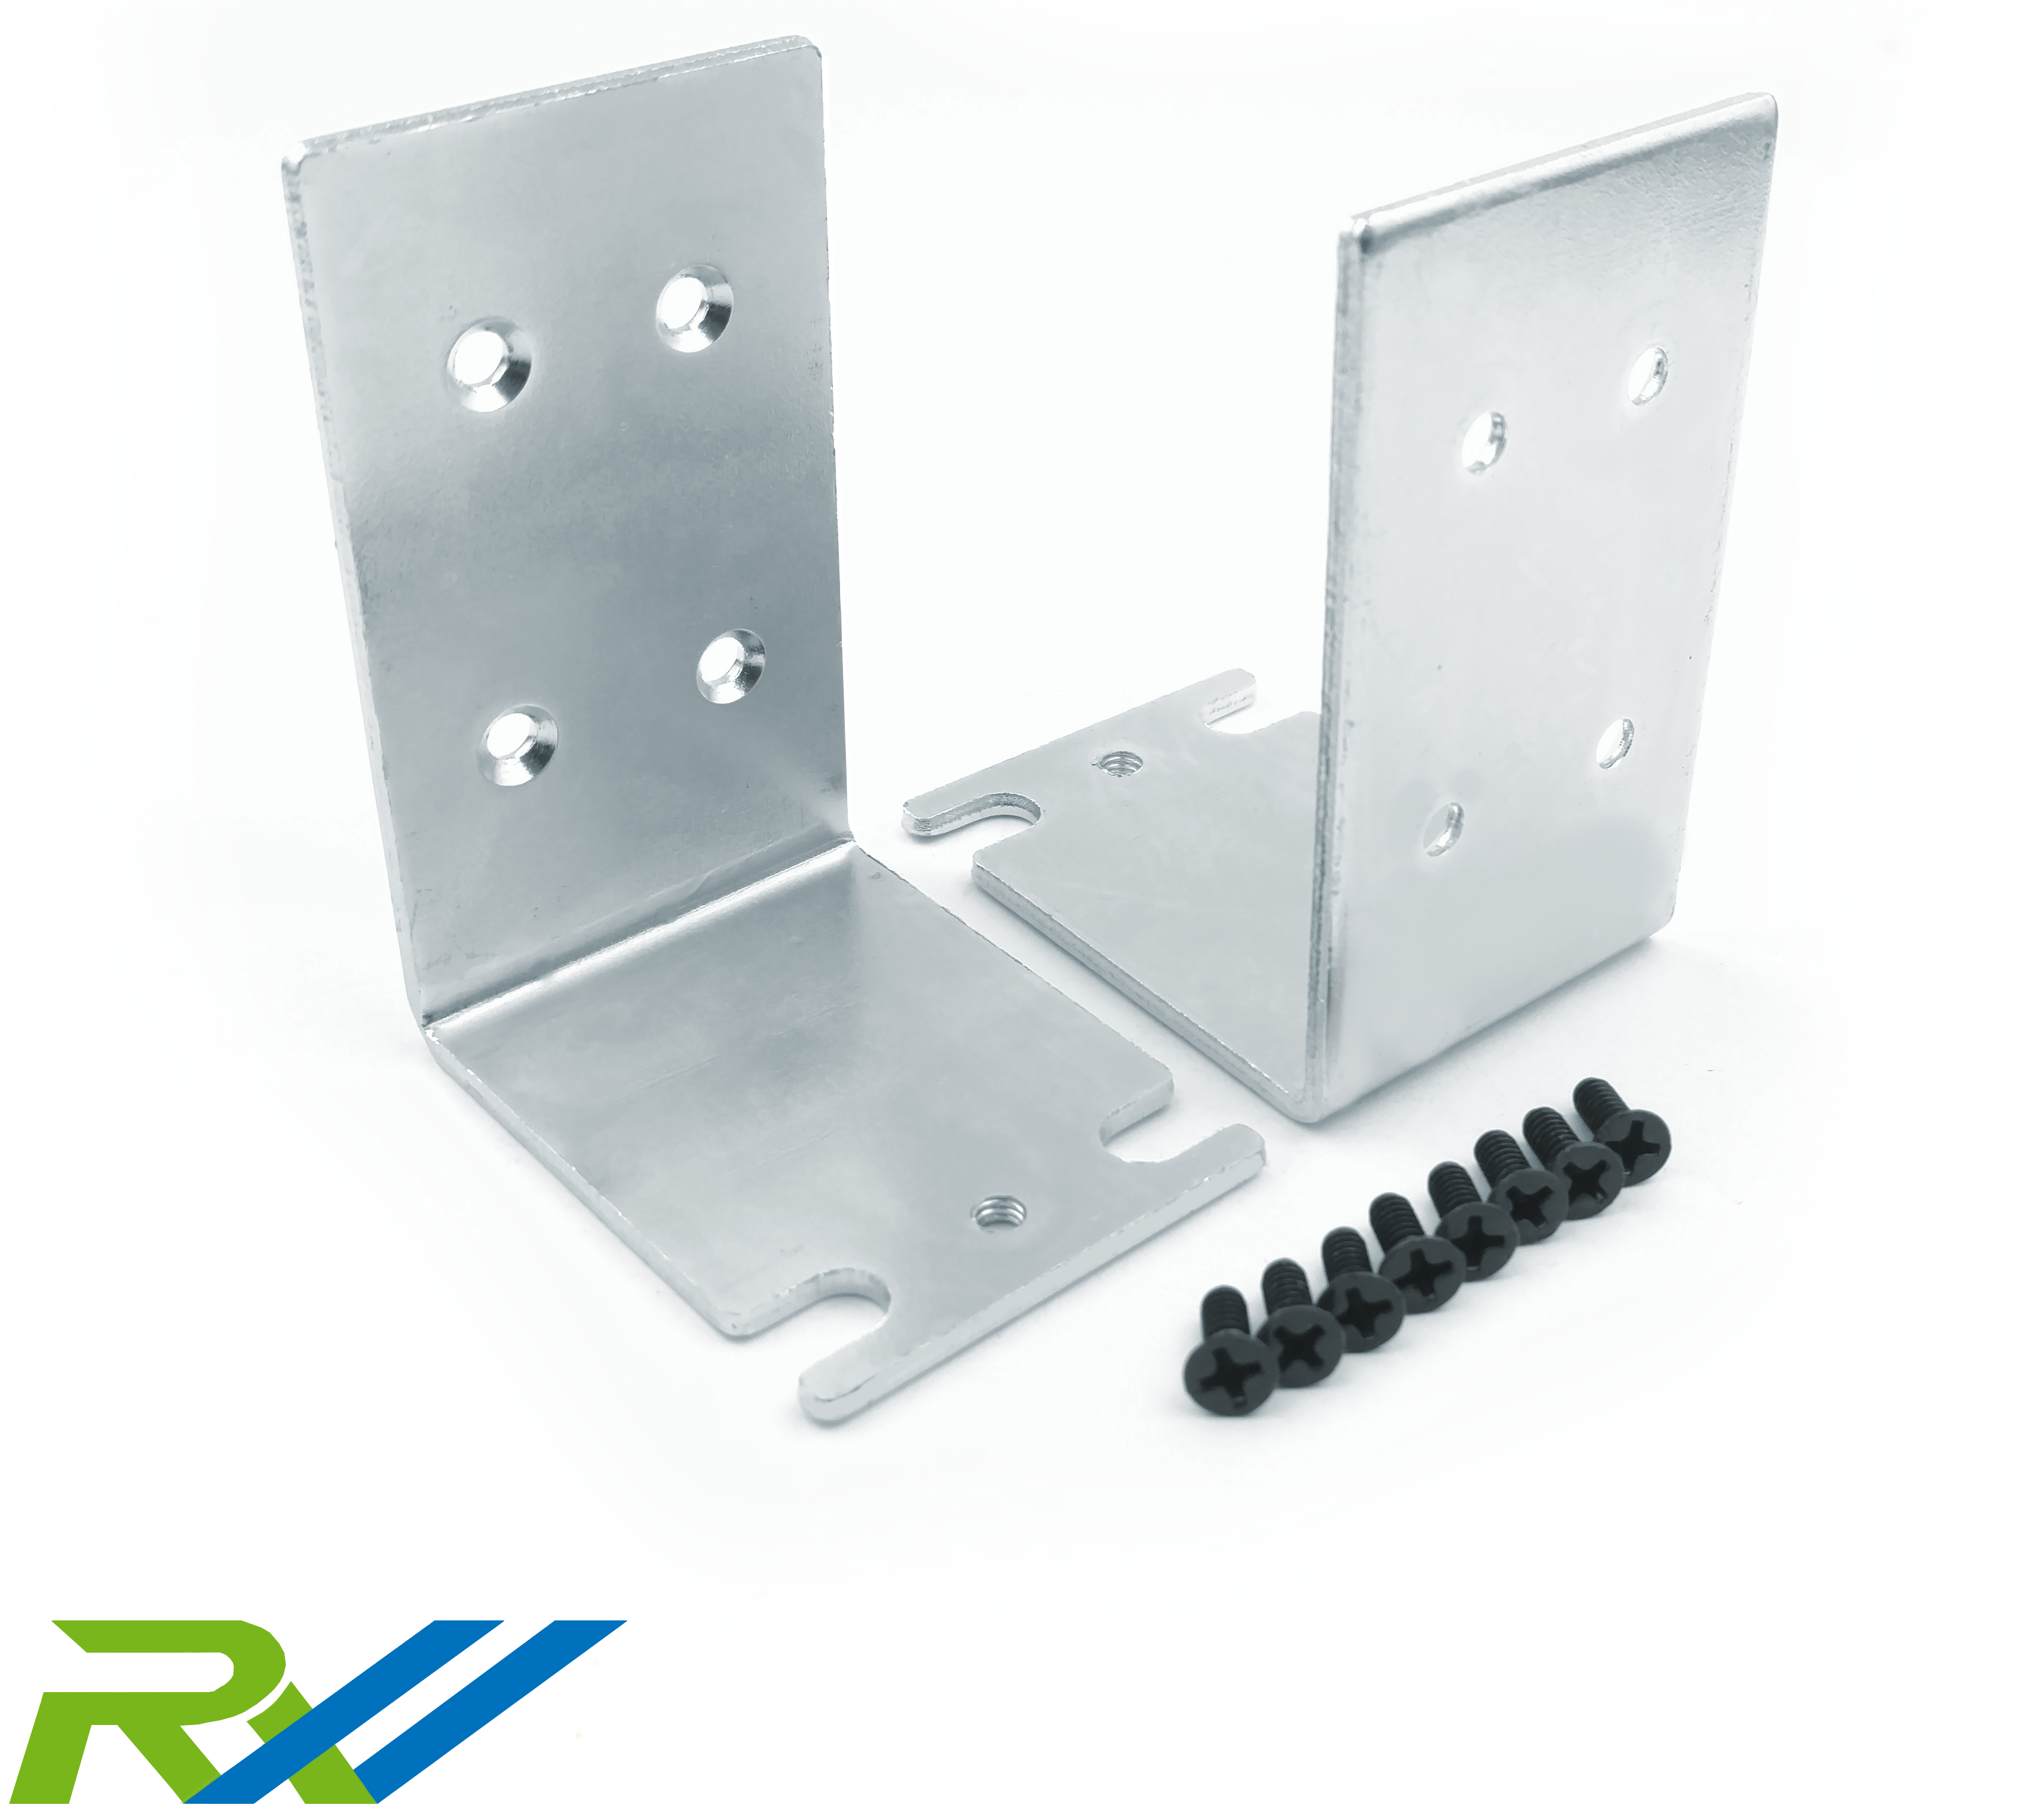 19" Cisco Rack Mount Kit for Cisco 4320 Series Routers